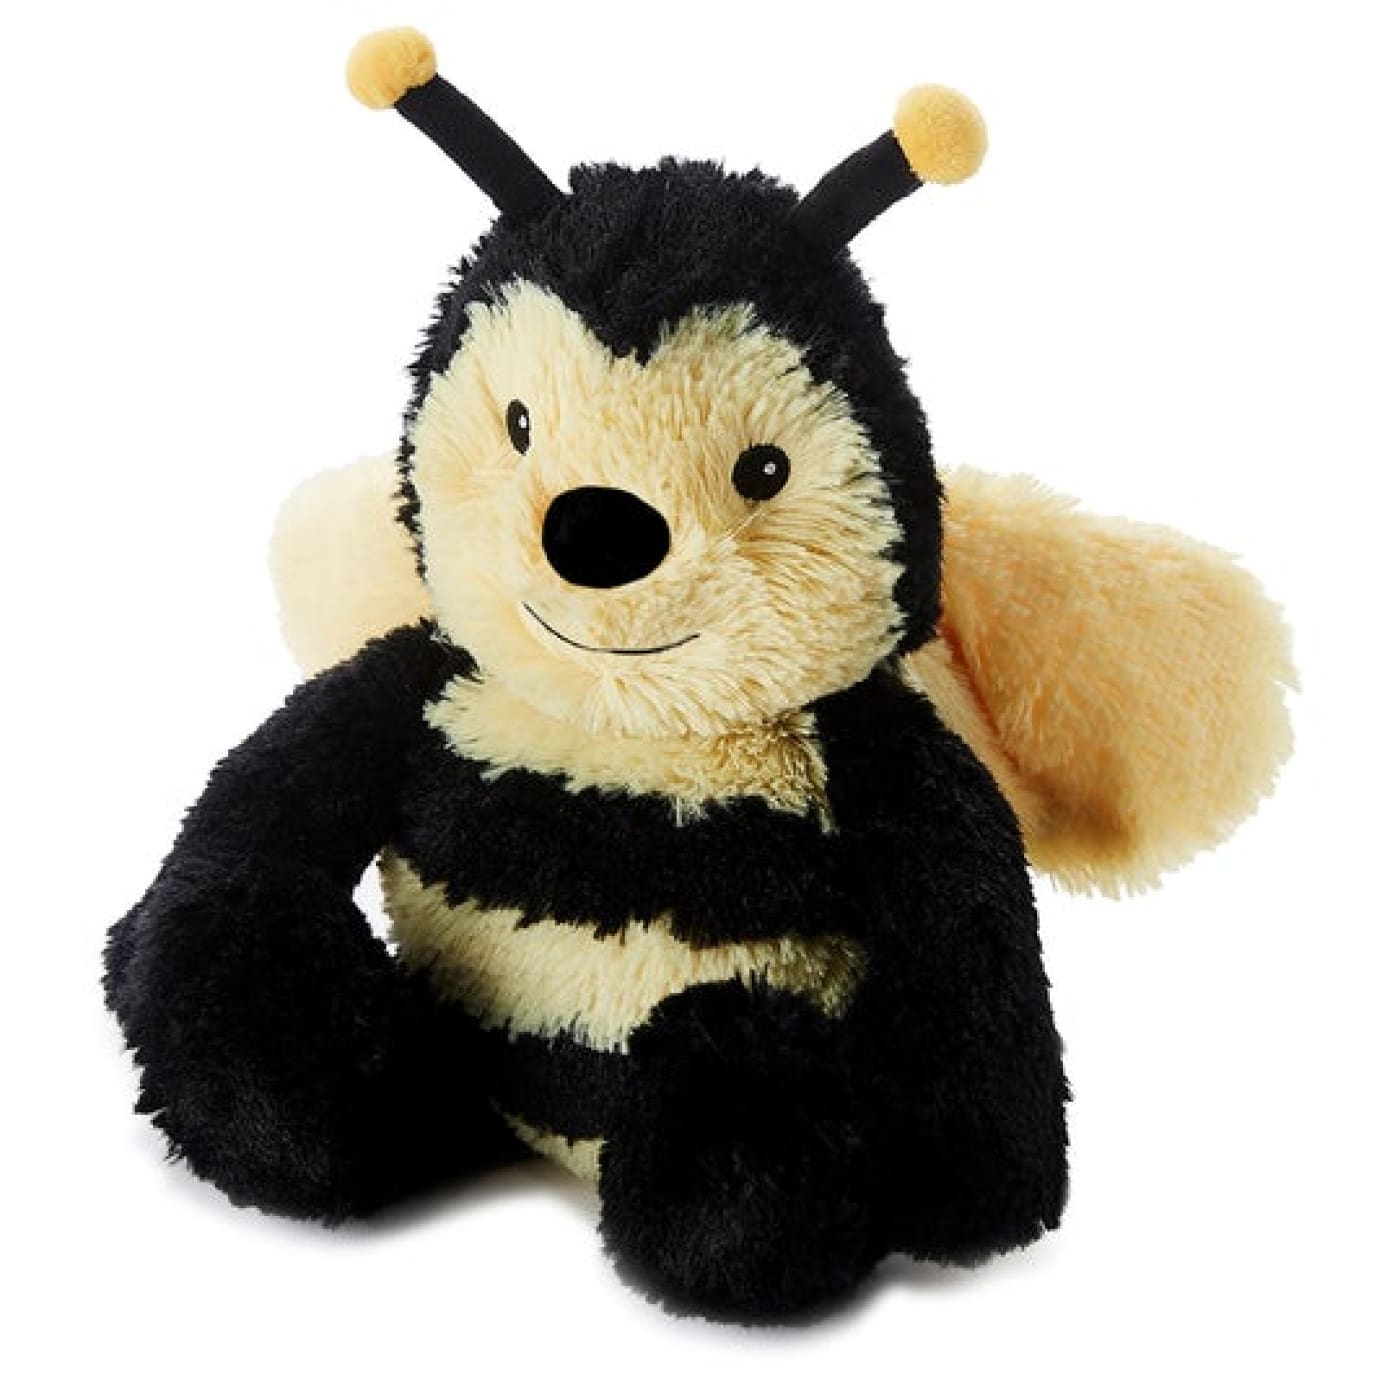 Warmies Cozy Plush - Honey Bumblebee - Bumblebee - HEALTH & HOME SAFETY - THERMOMETERS/MEDICINAL